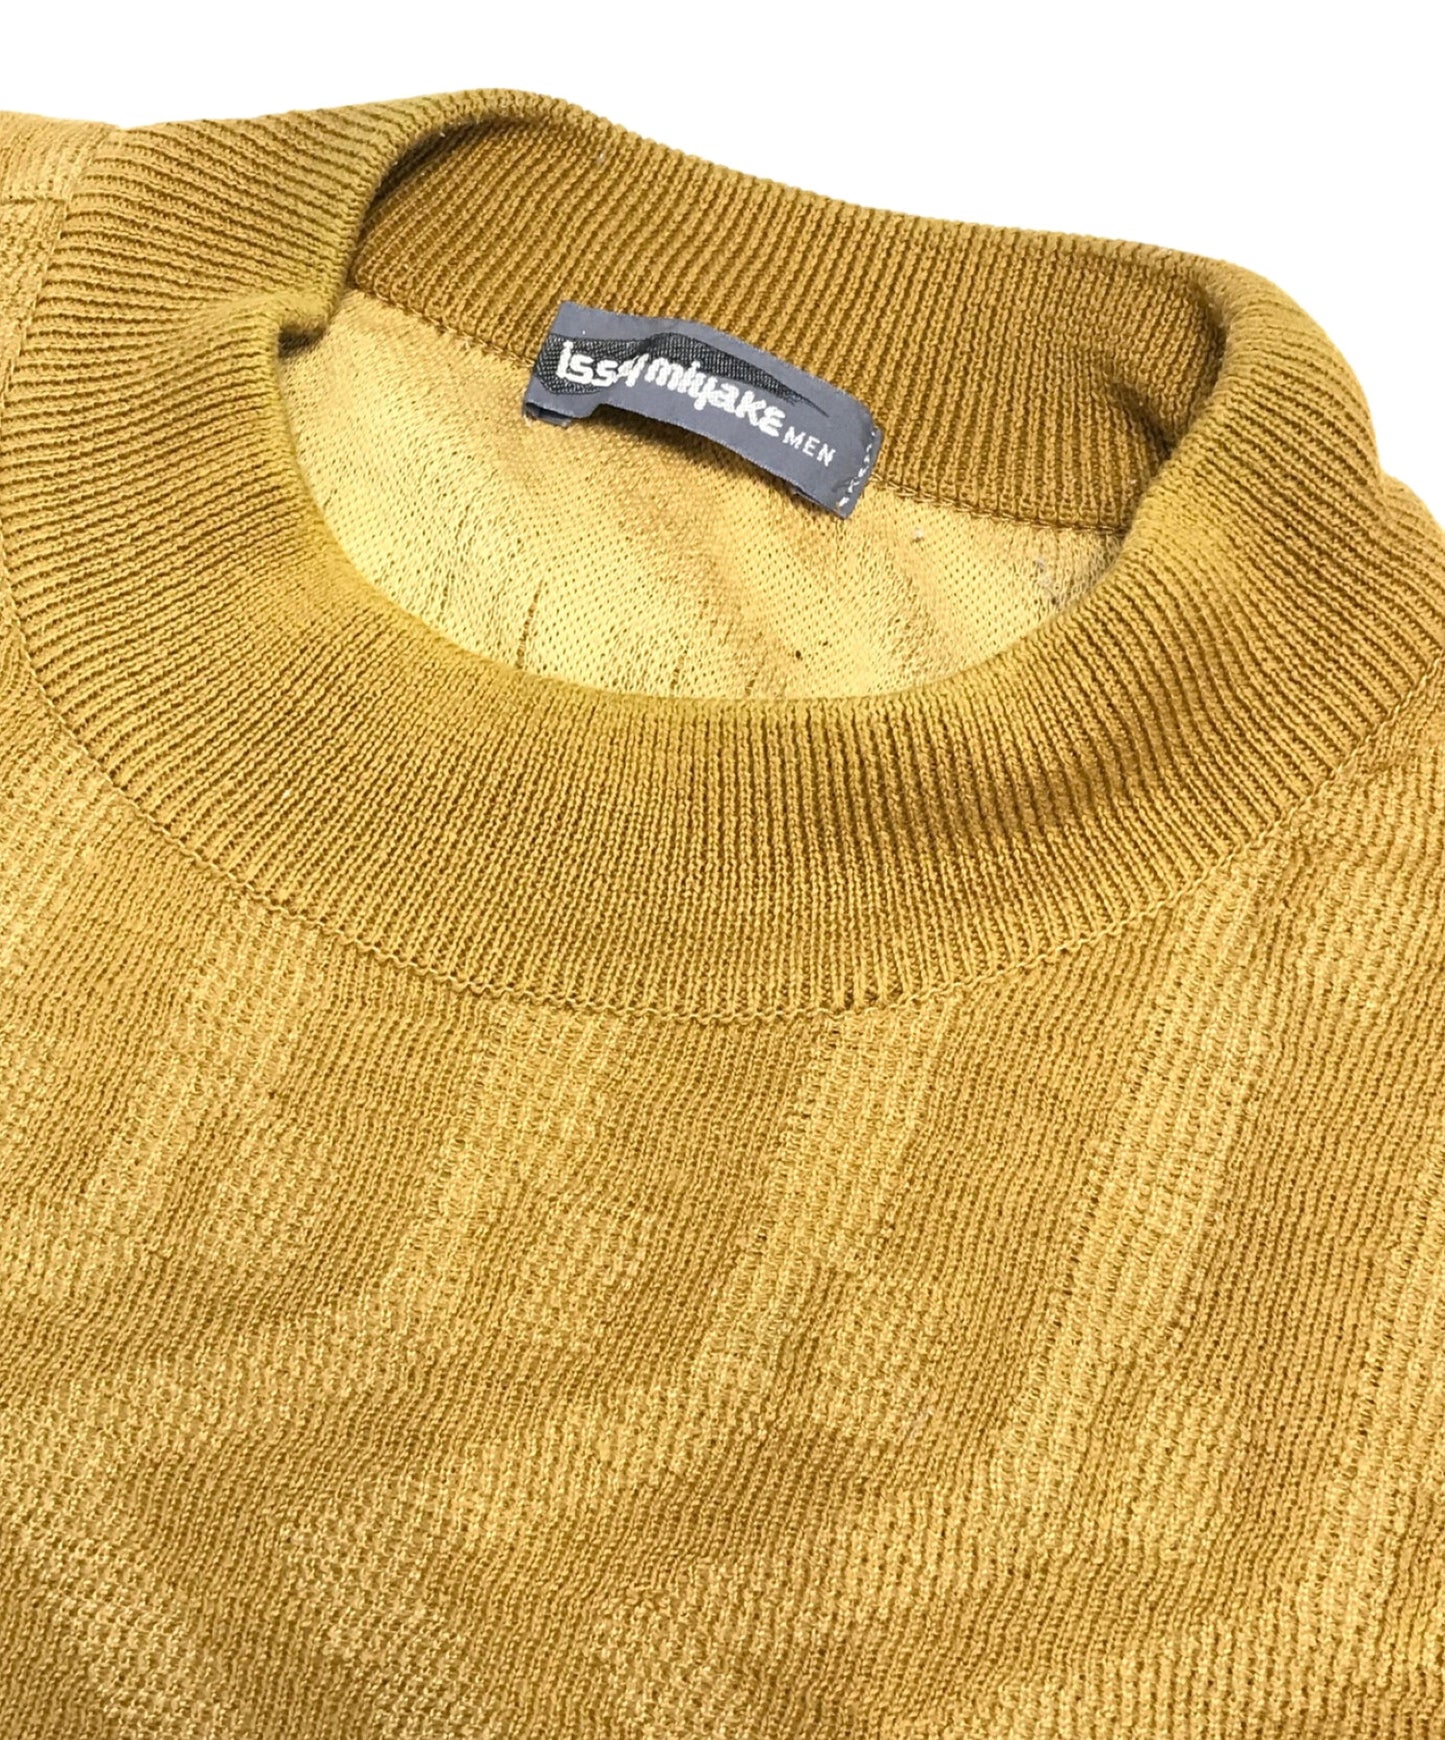 Issey Miyake [Old] 80's Cotton Short-Sleeved Knit XM17219AE